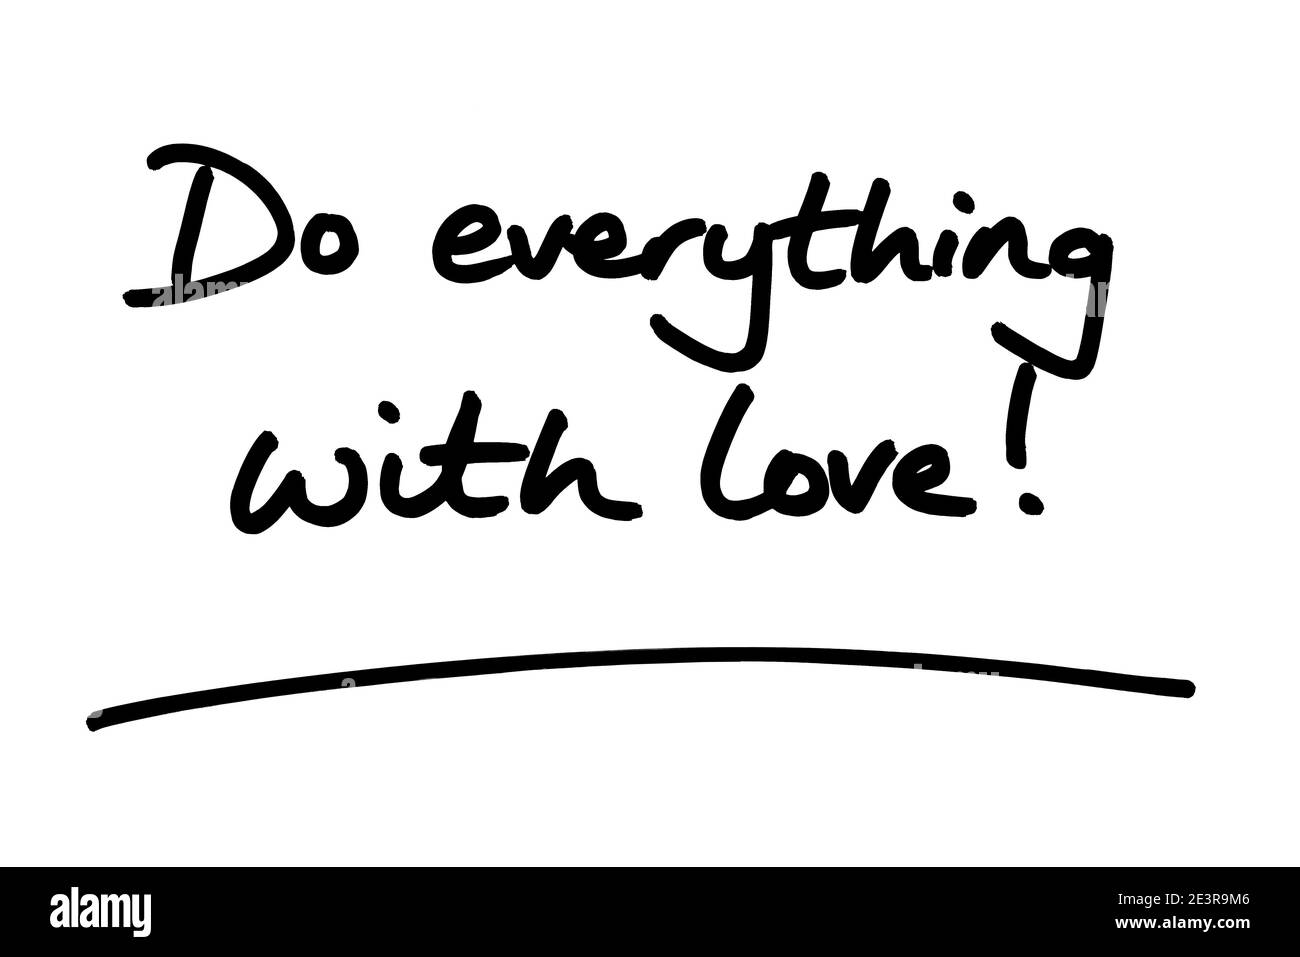 Do everything with love! handwritten on a white background. Stock Photo